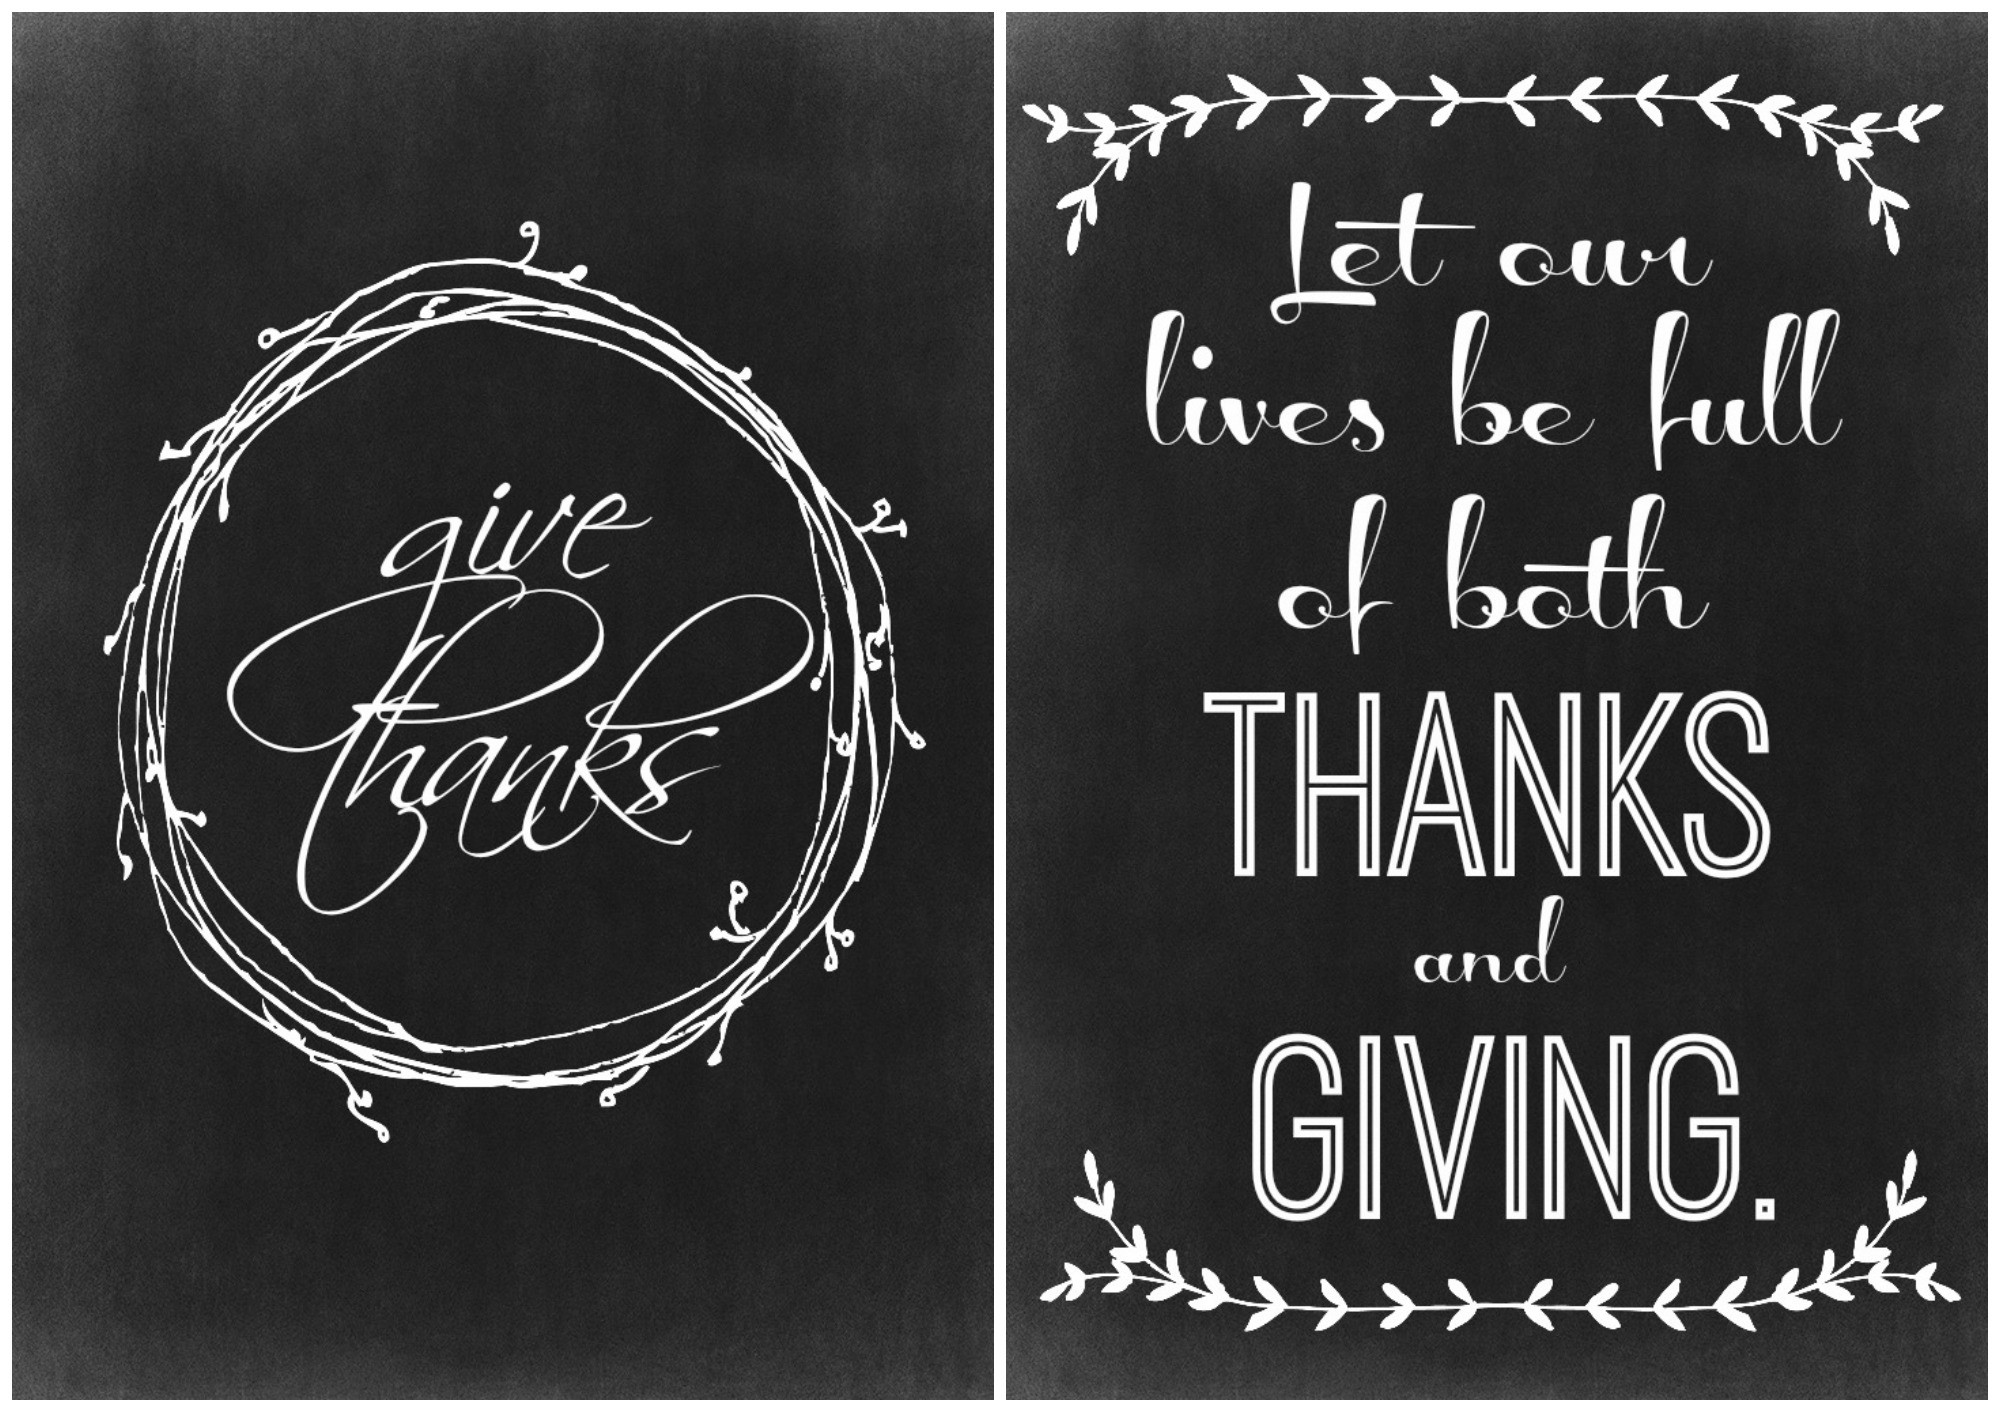 Thanksgiving Quotes Board
 Two Thanksgiving Chalkboard Printables The Crazy Craft Lady